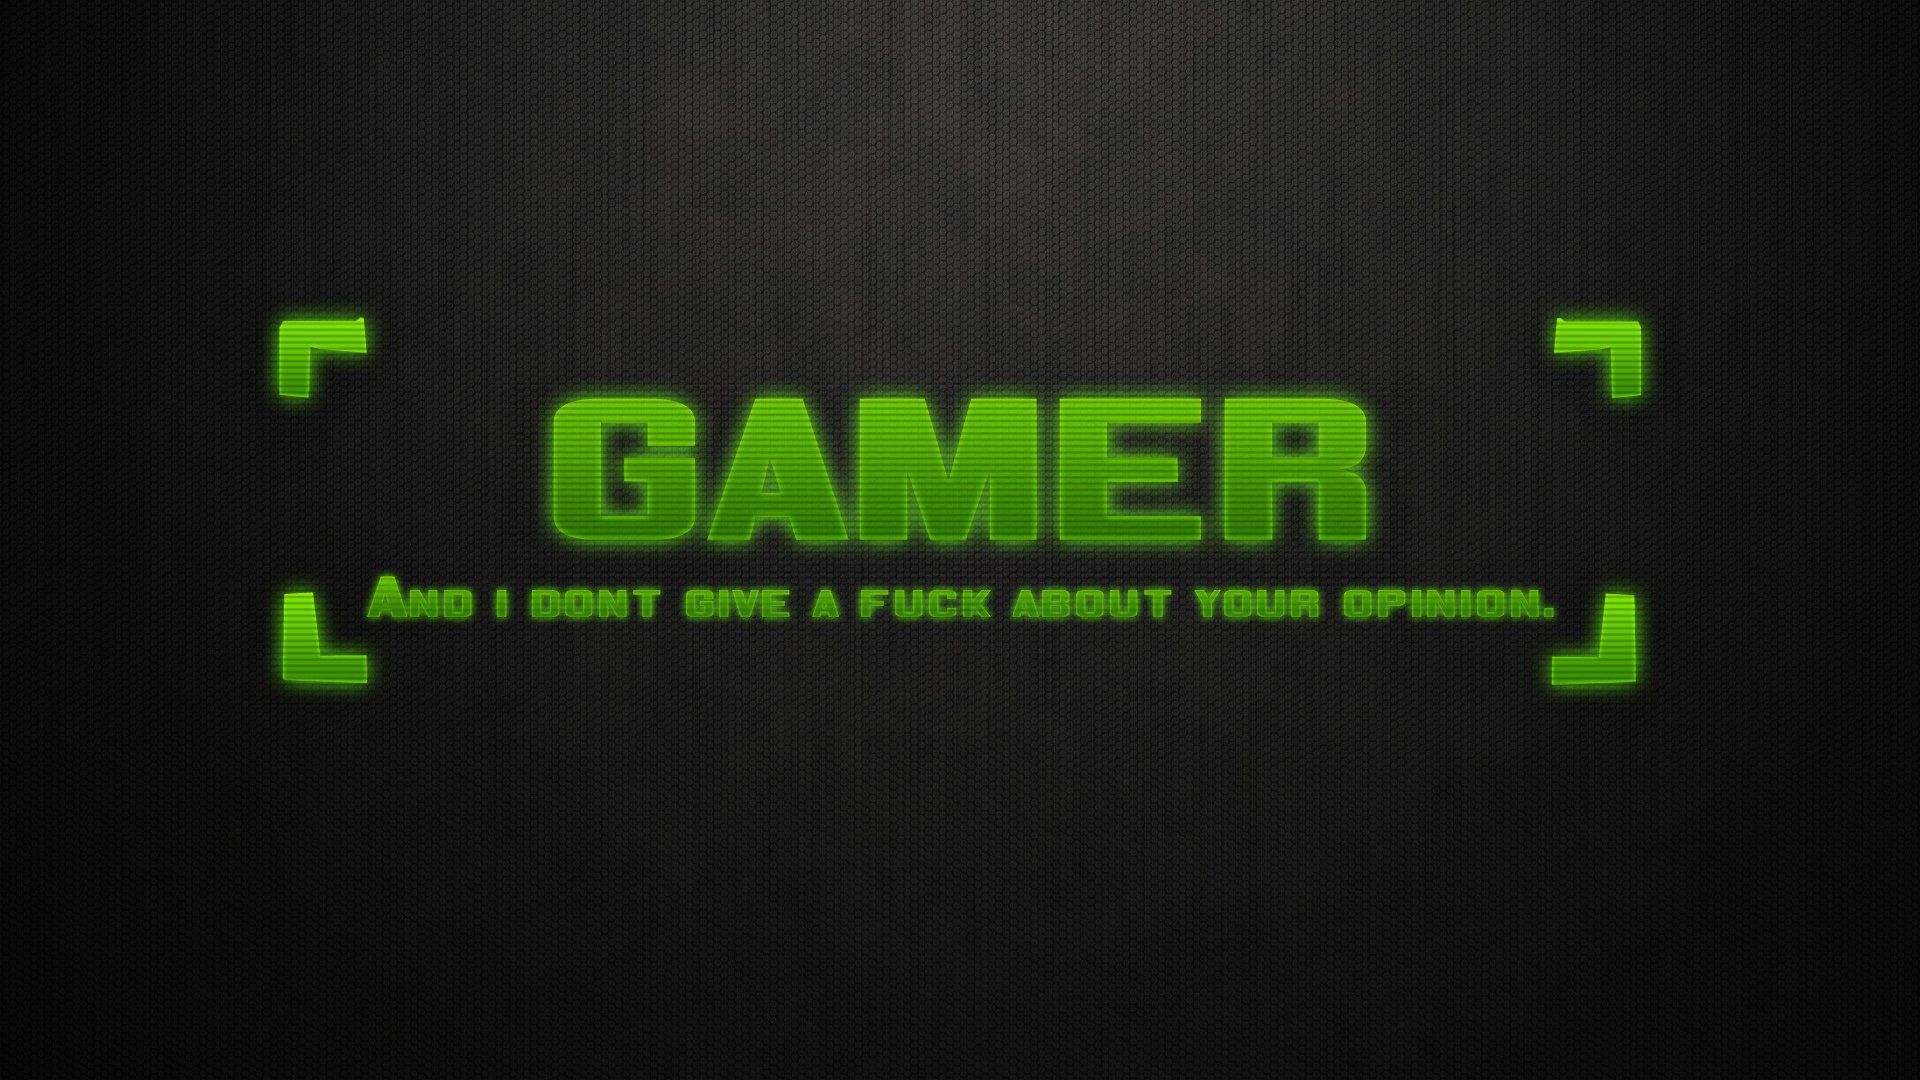 Cool Gamer Wallpapers 19201080 Cool Gamer Backgrounds 45